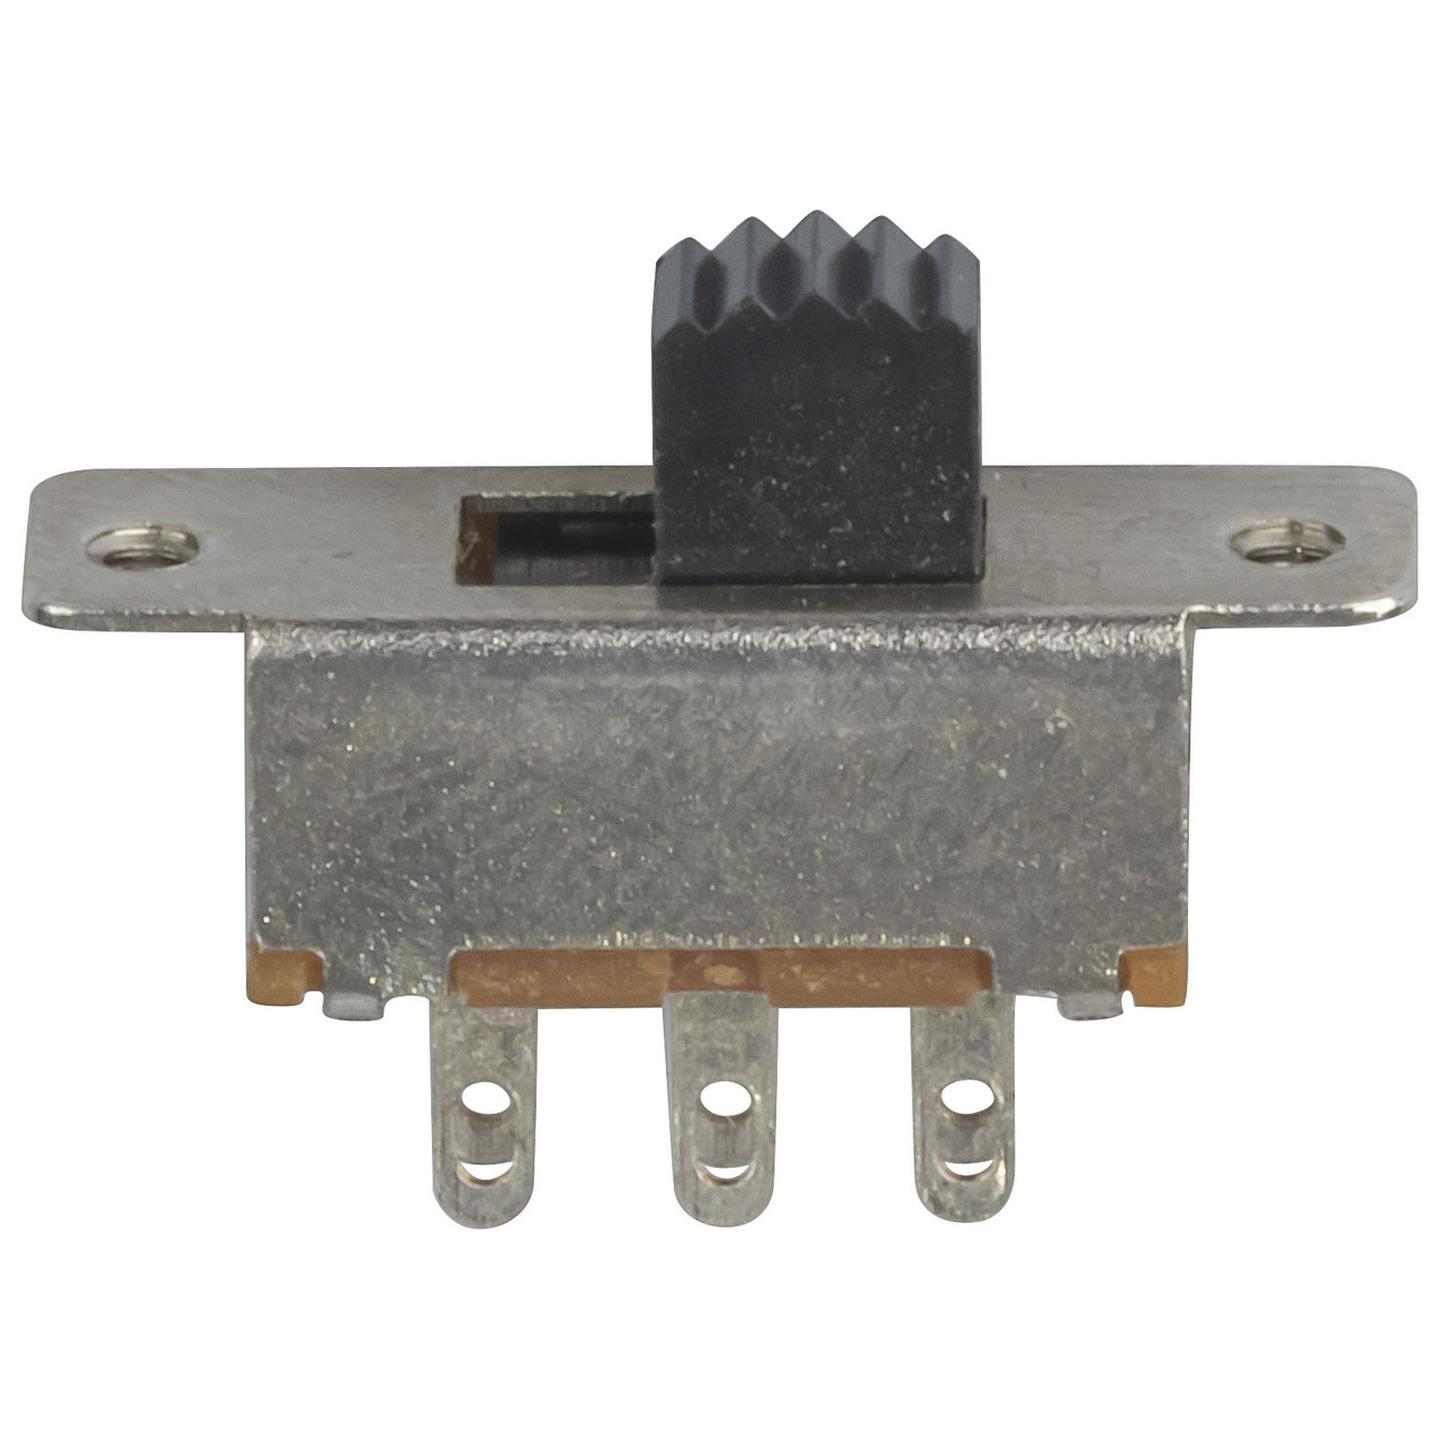 Sub-miniature DPDT Panel Mount Switch- Slide style